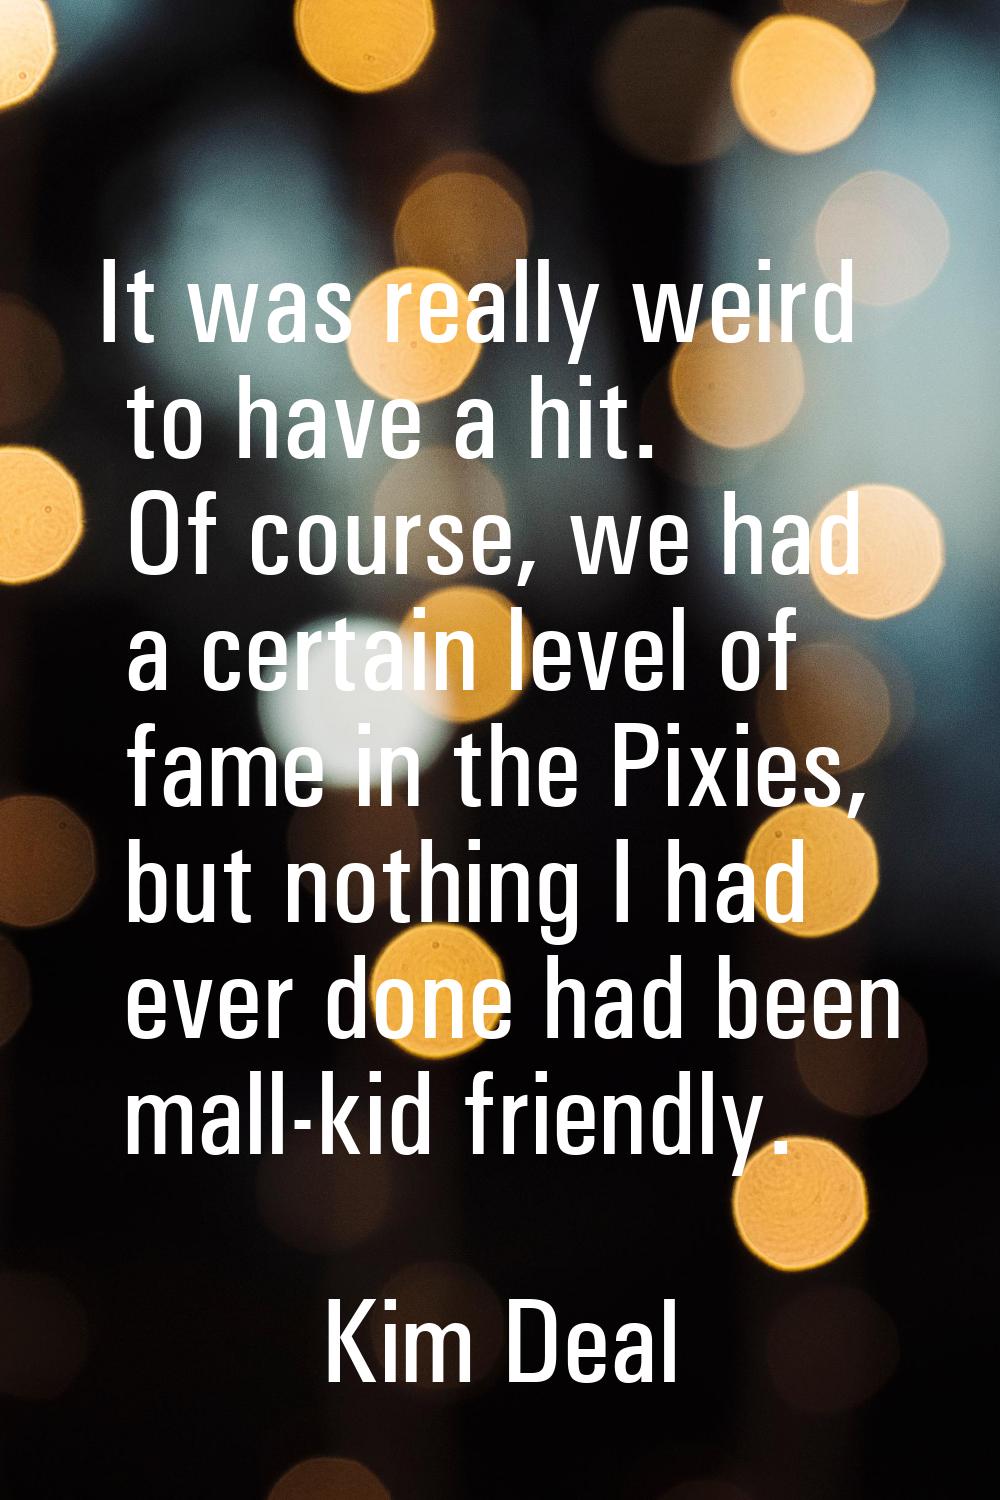 It was really weird to have a hit. Of course, we had a certain level of fame in the Pixies, but not